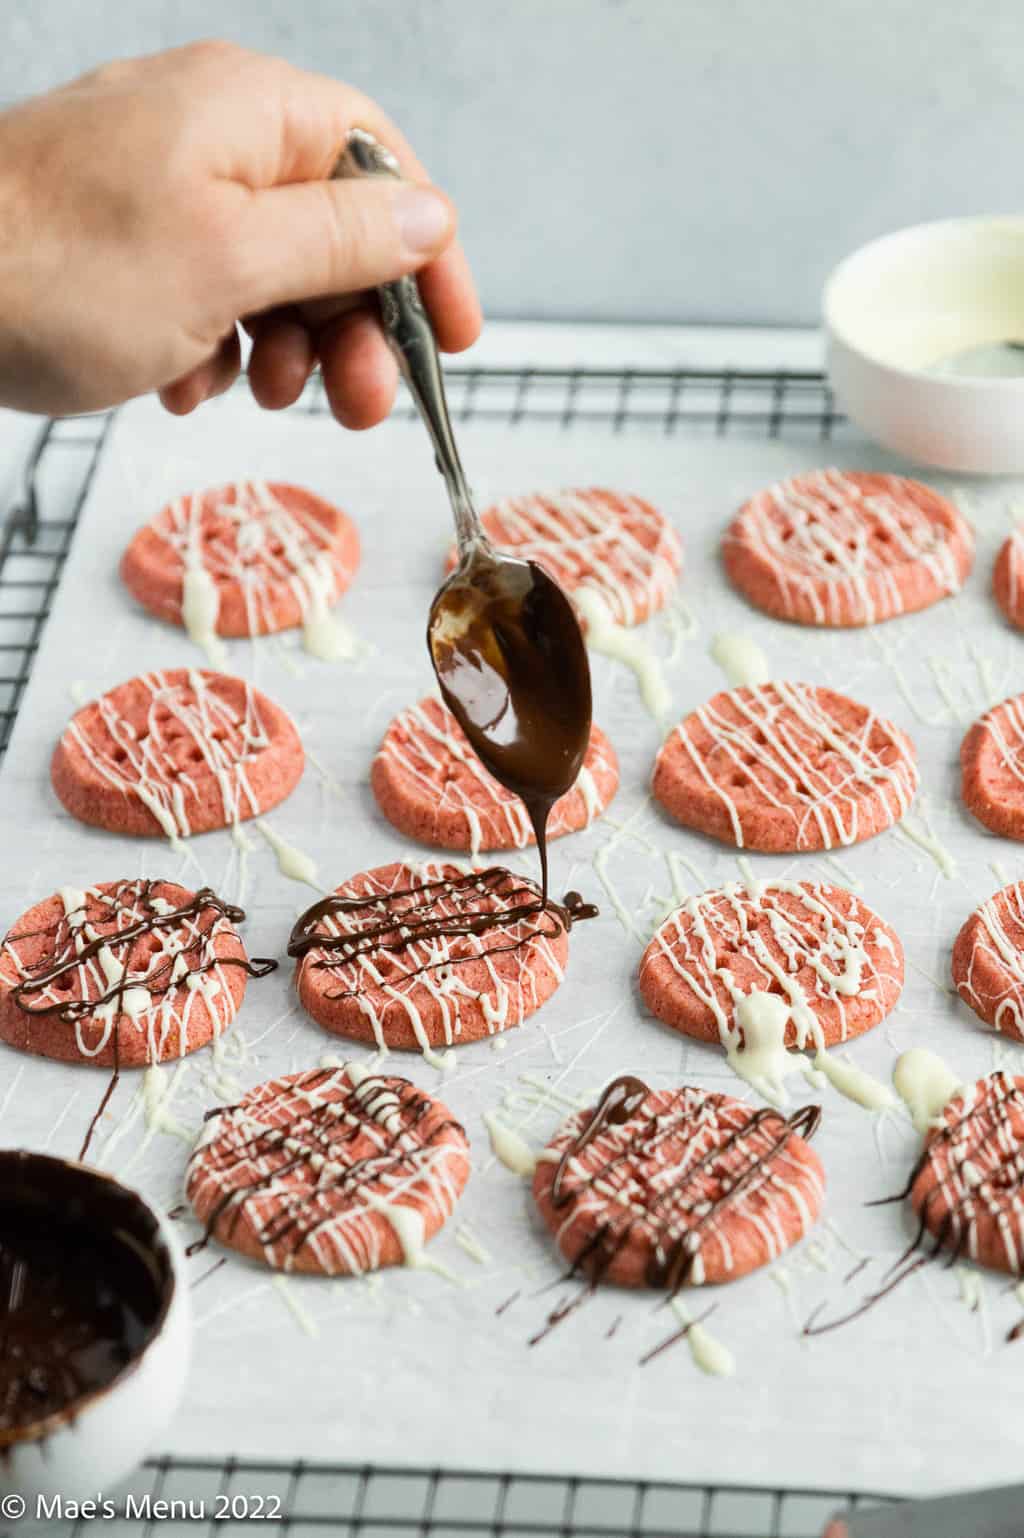 Drizzling melted chocolate over the strawberry cookies.